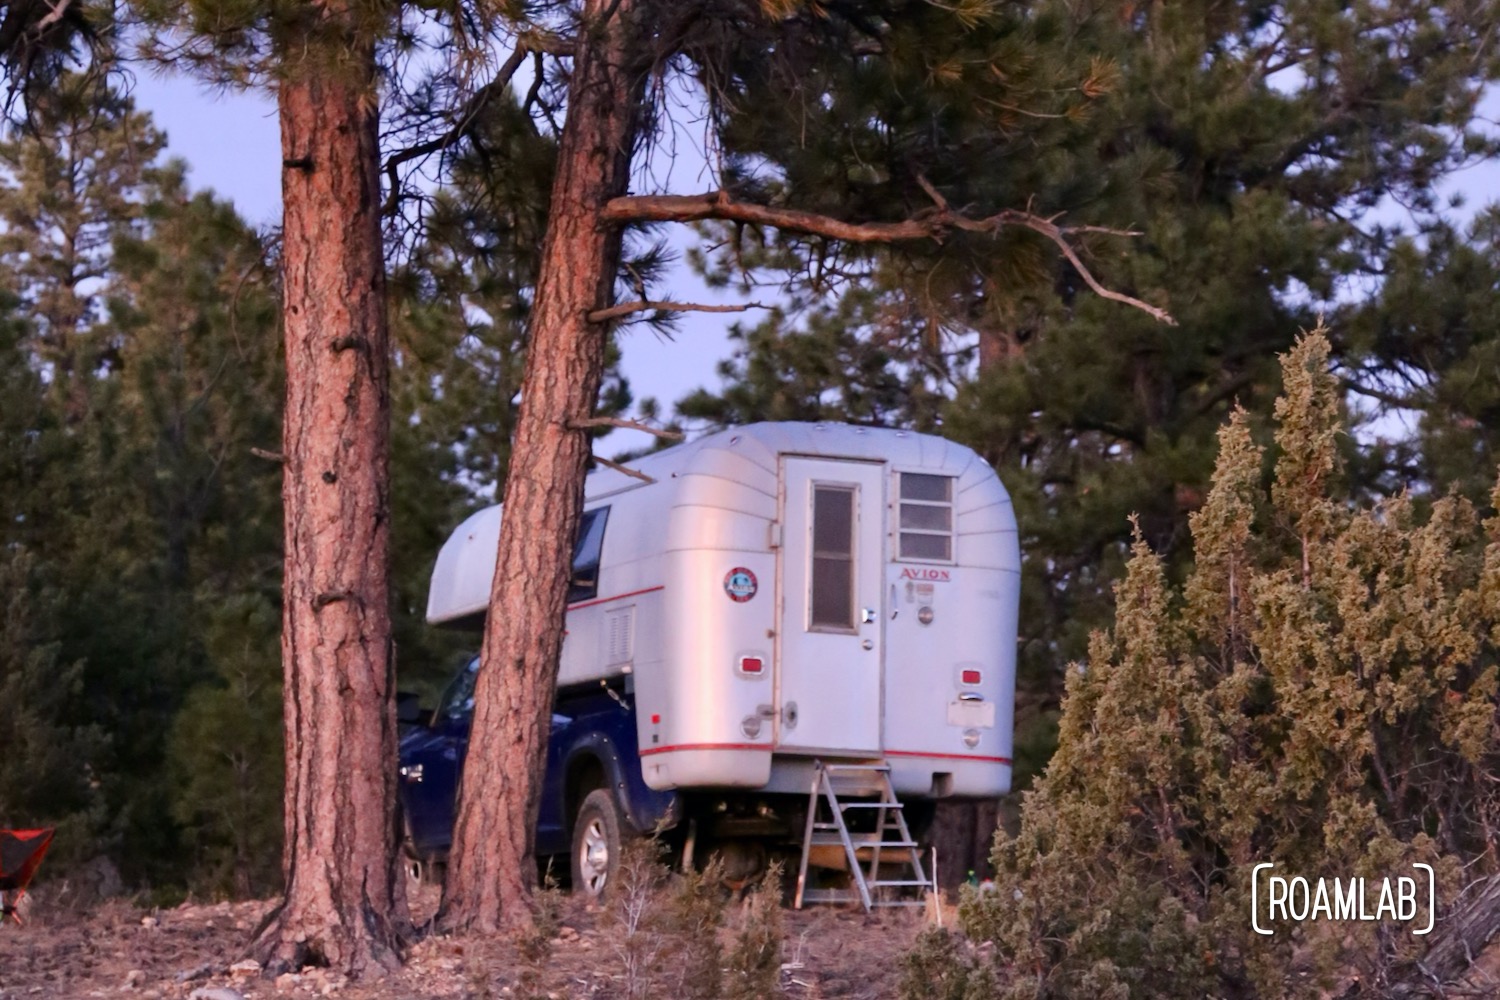 Bryce Canyon National Park has a campground, but for boondockers like us, we were delighted to find campsites off a forest road in Dixie National Forest.